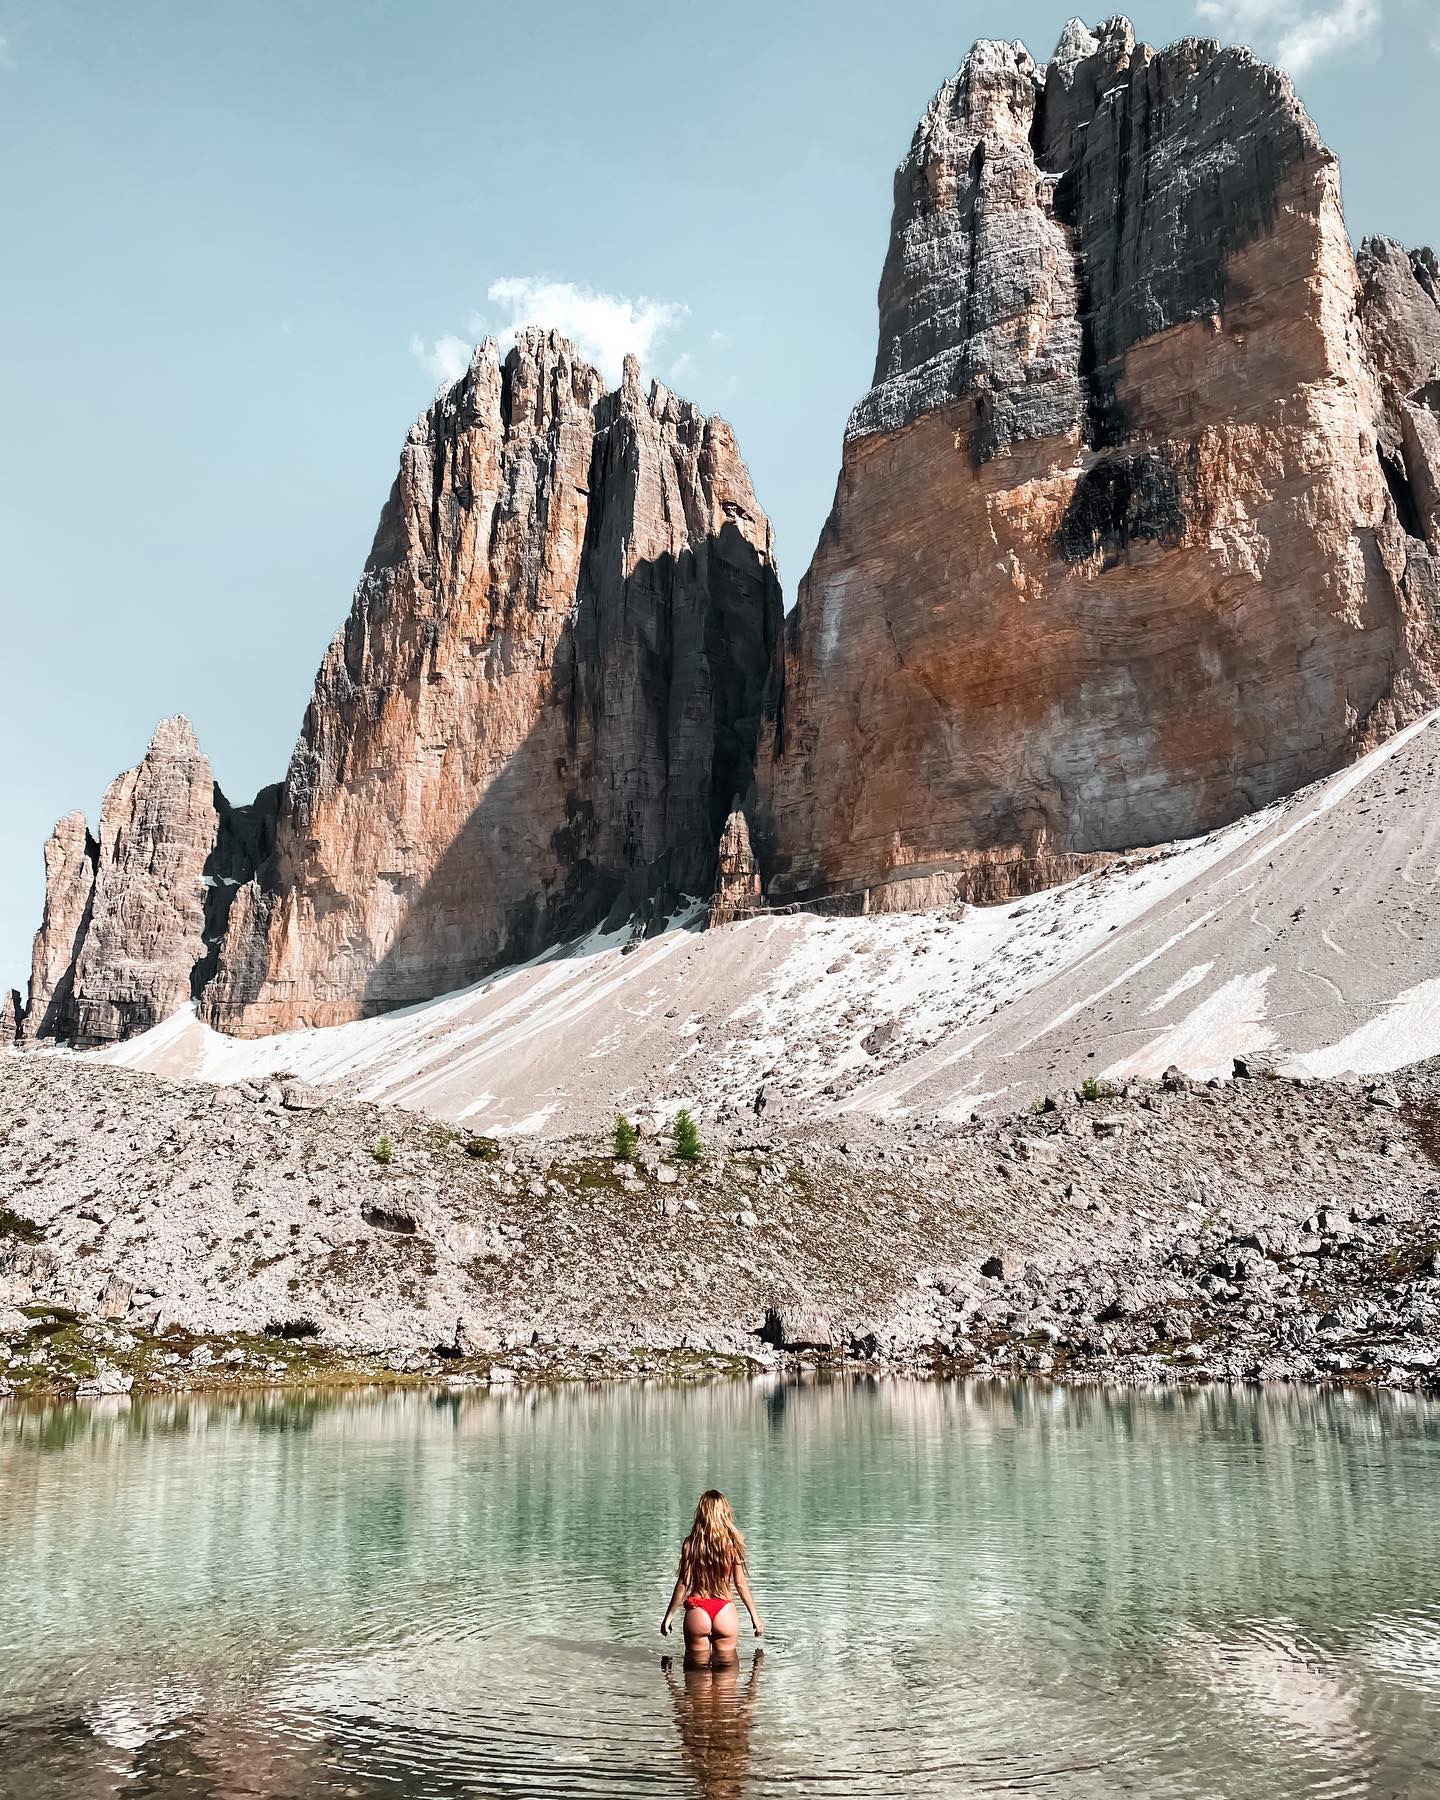 Ice cold dips in a mountain lake. I love it and it’s so healthy: ice bathing reduces the stress levels, slows down the aging process, boosts the immune system and has much more health benefits. Who would like to go with me 🤗?
.
.
📸by @luca.schranz .
.
#3cime #trecimedilavaredo #dolomites #italy #mountainlake #swimming #dolomiten #adventure #outdoor #travel #travelgirl #welltravelled #3zinnen